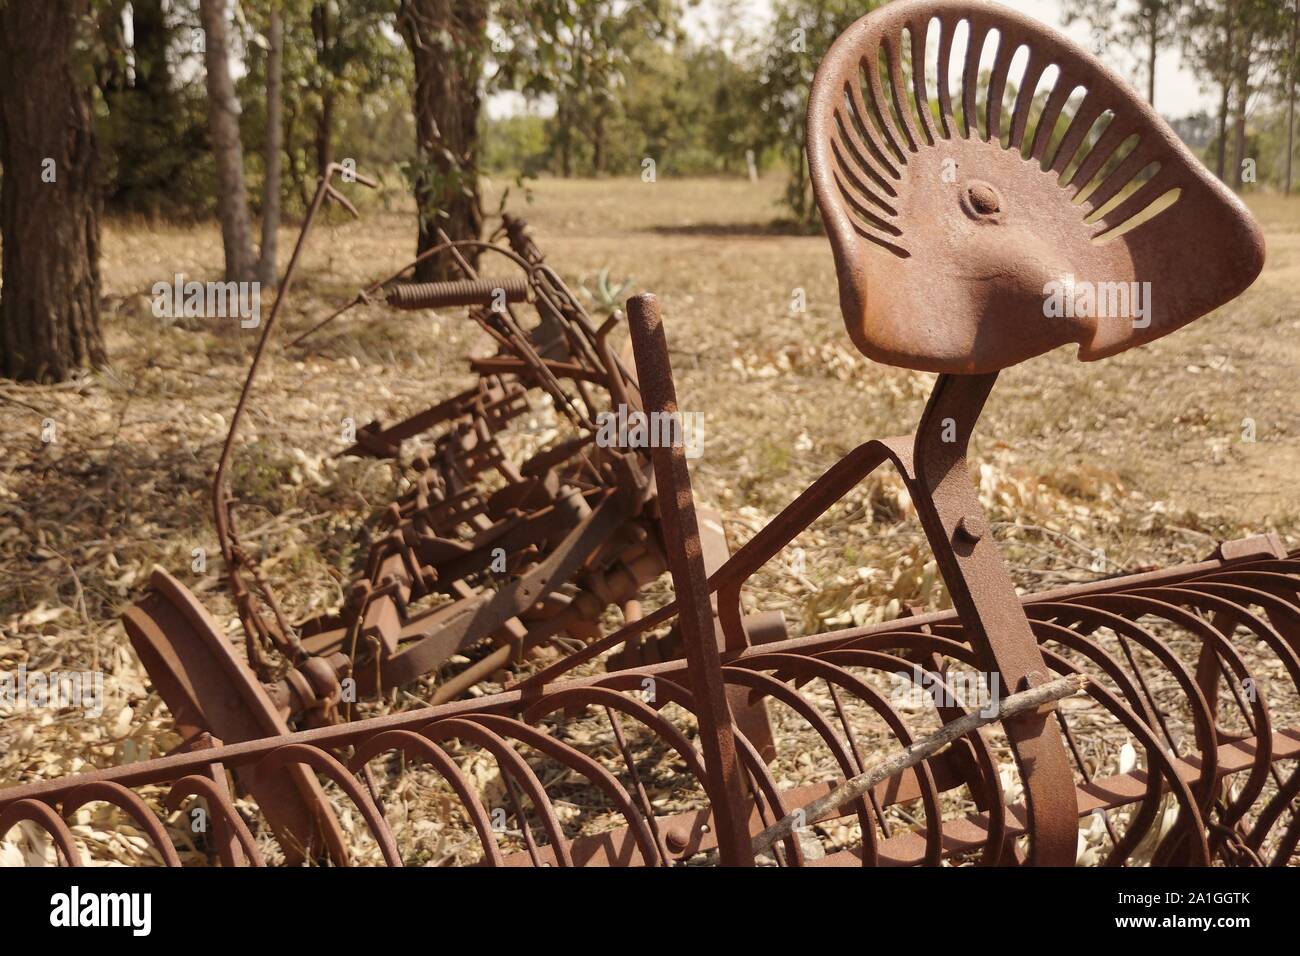 Historical antique field cultivator Stock Photo